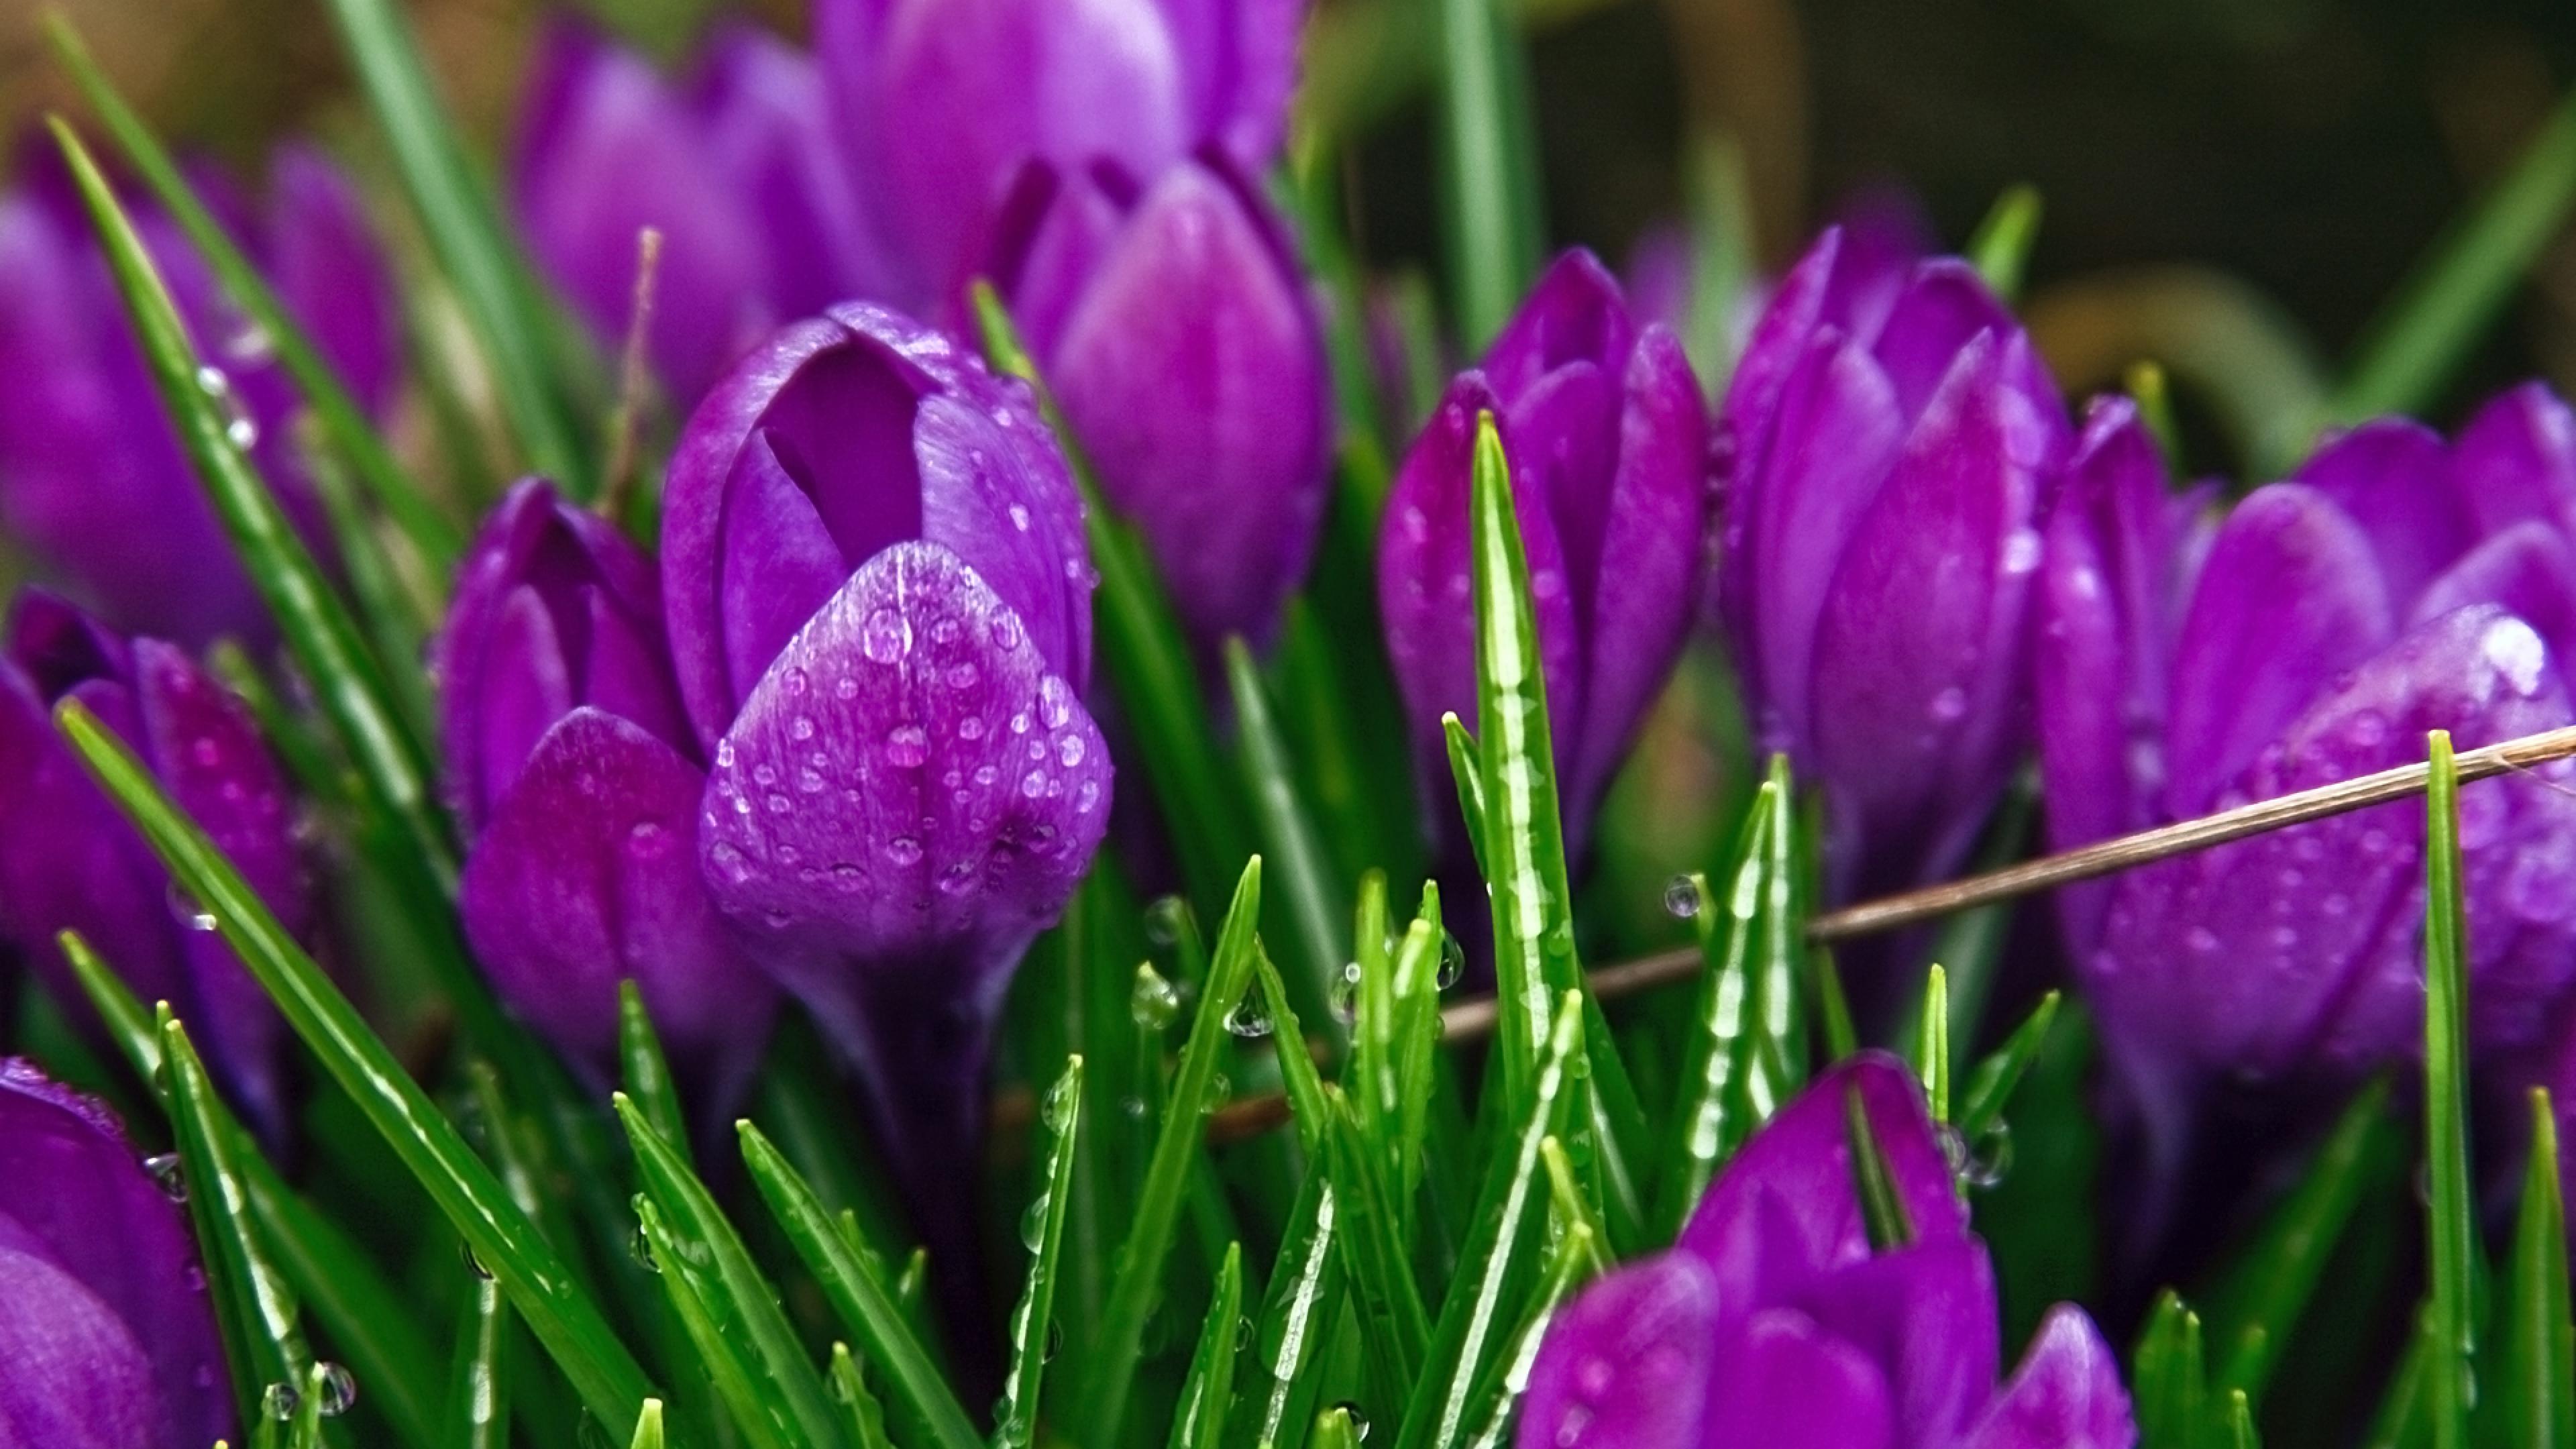 Beautiful Purple Flowers Pictures, Images and Wallpapers Flower